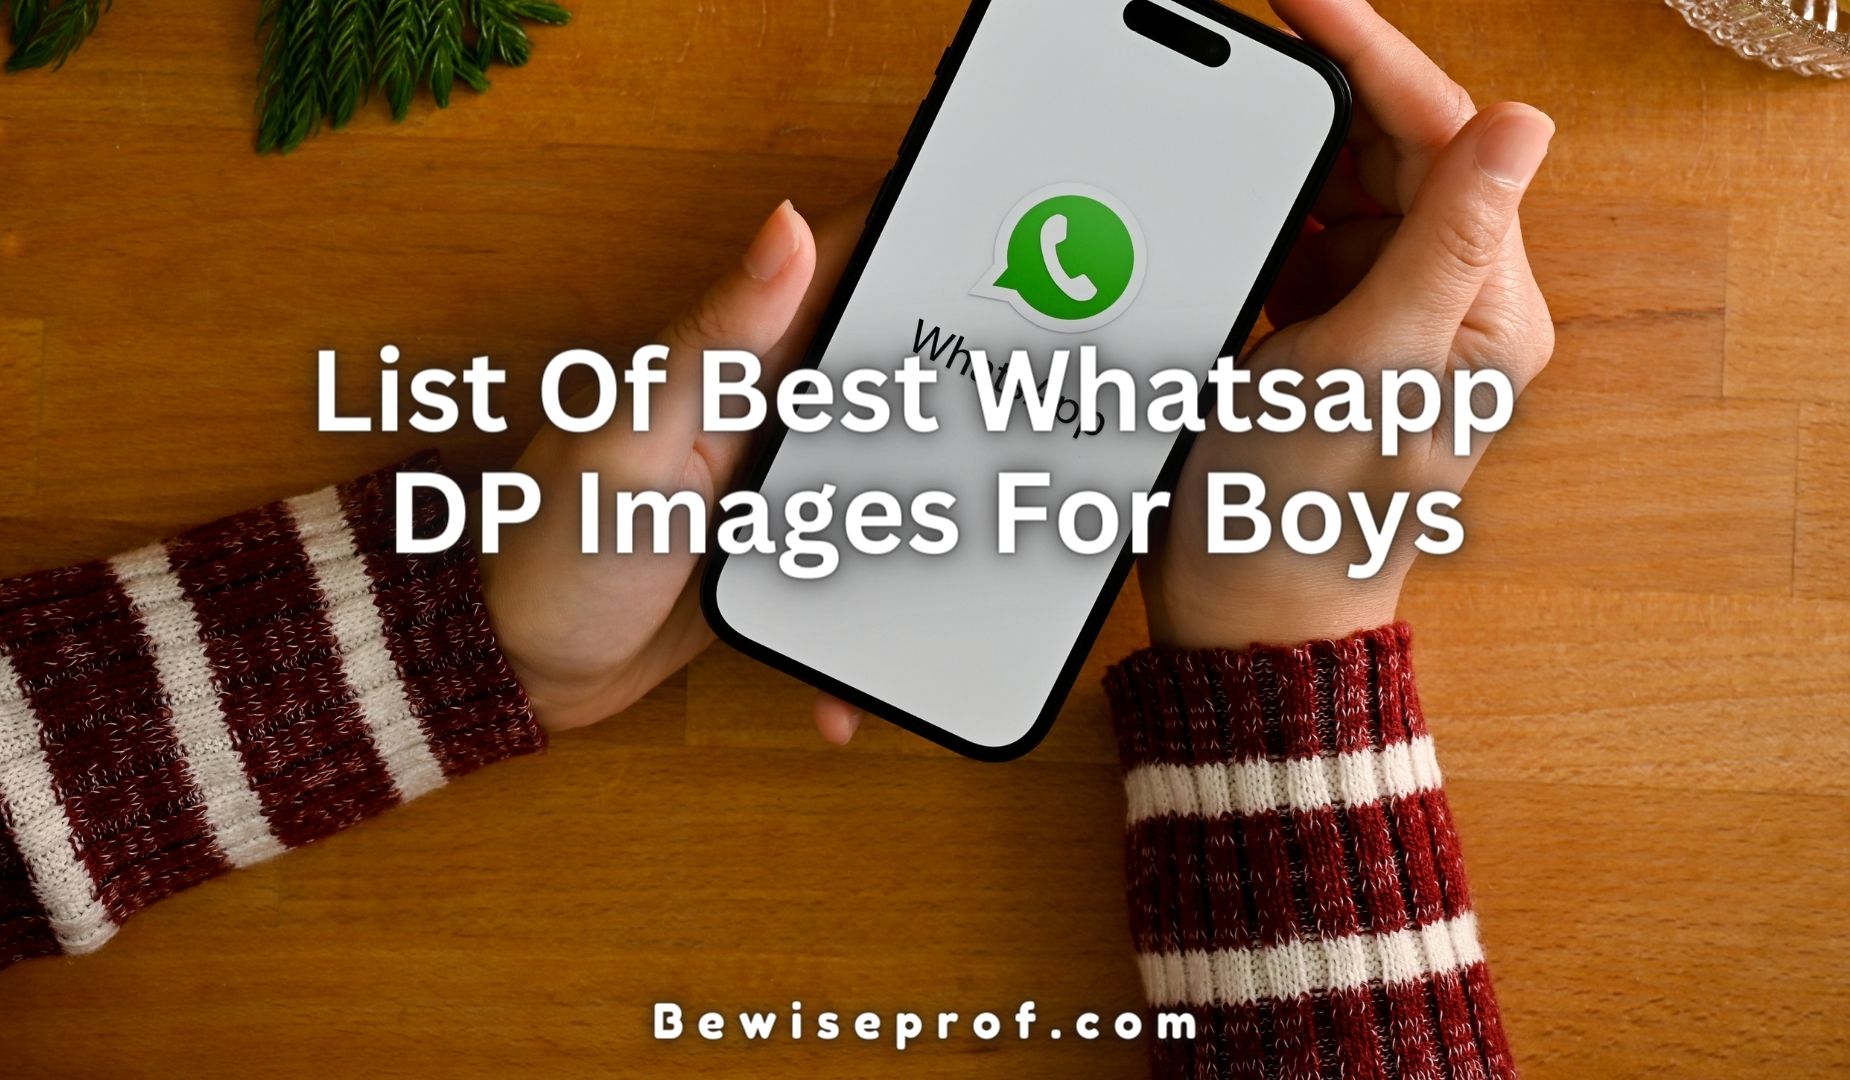 List Of Best Whatsapp DP Images For Boys